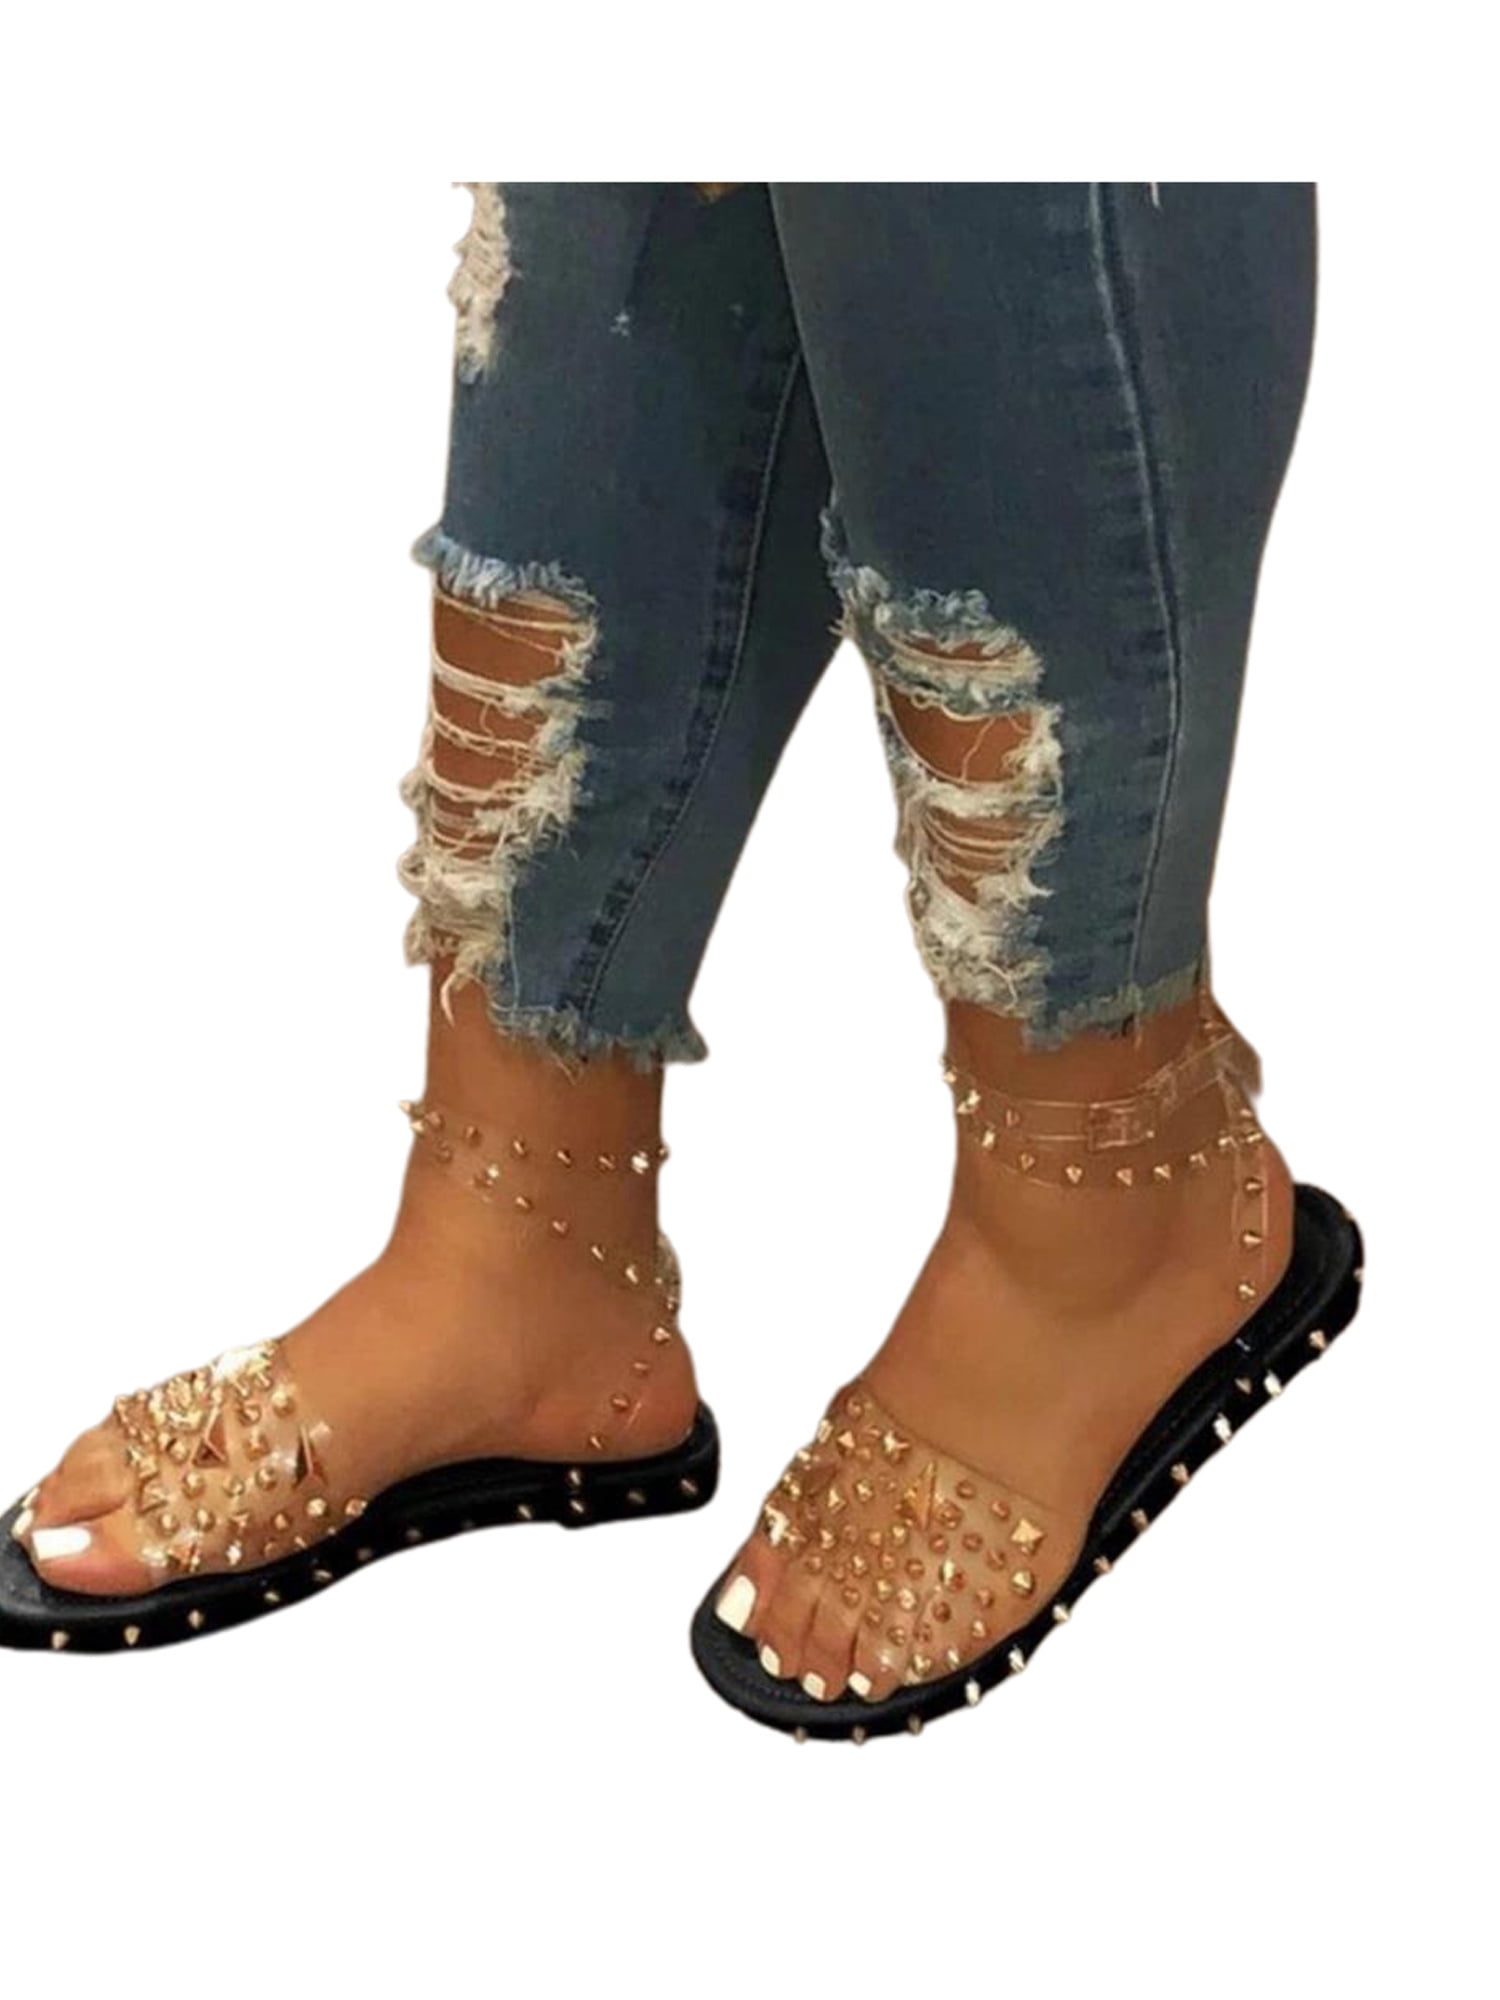 Women Flats Rivets Slides Strappy Studded Gladiator Sandals Slippers Open Toe